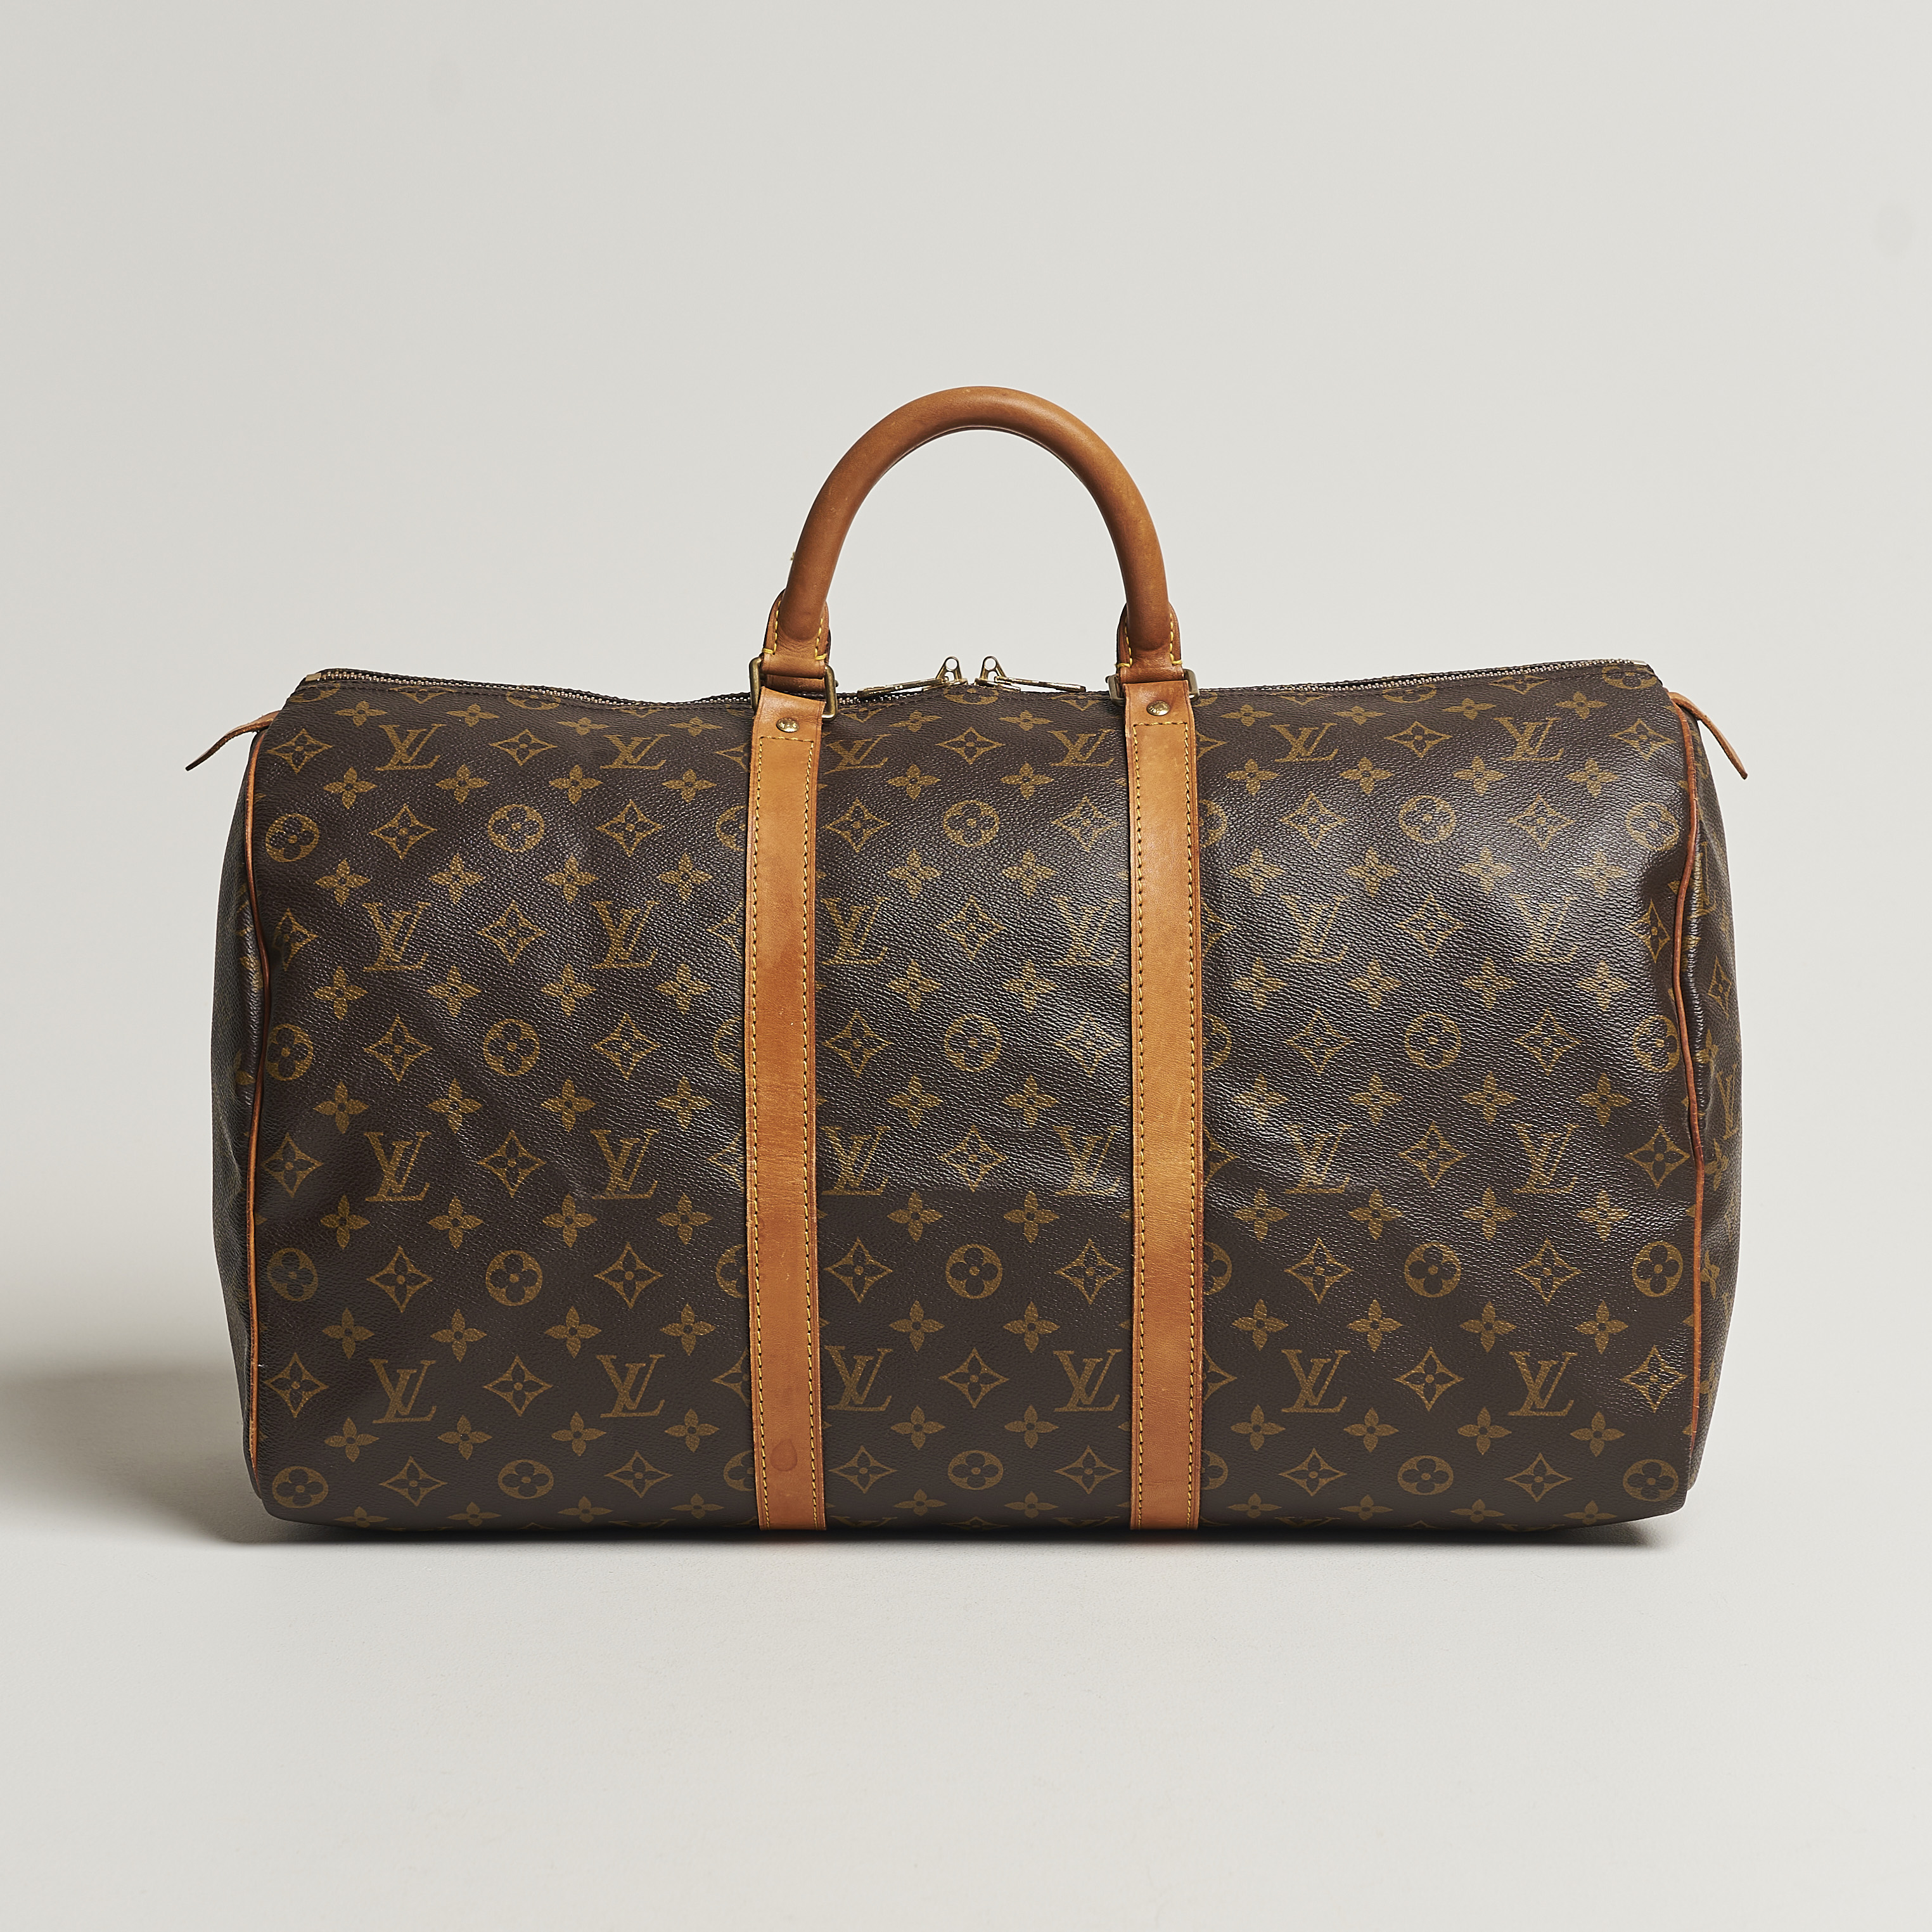 The hand bag silver Louis Vuitton worn by Drake on his account